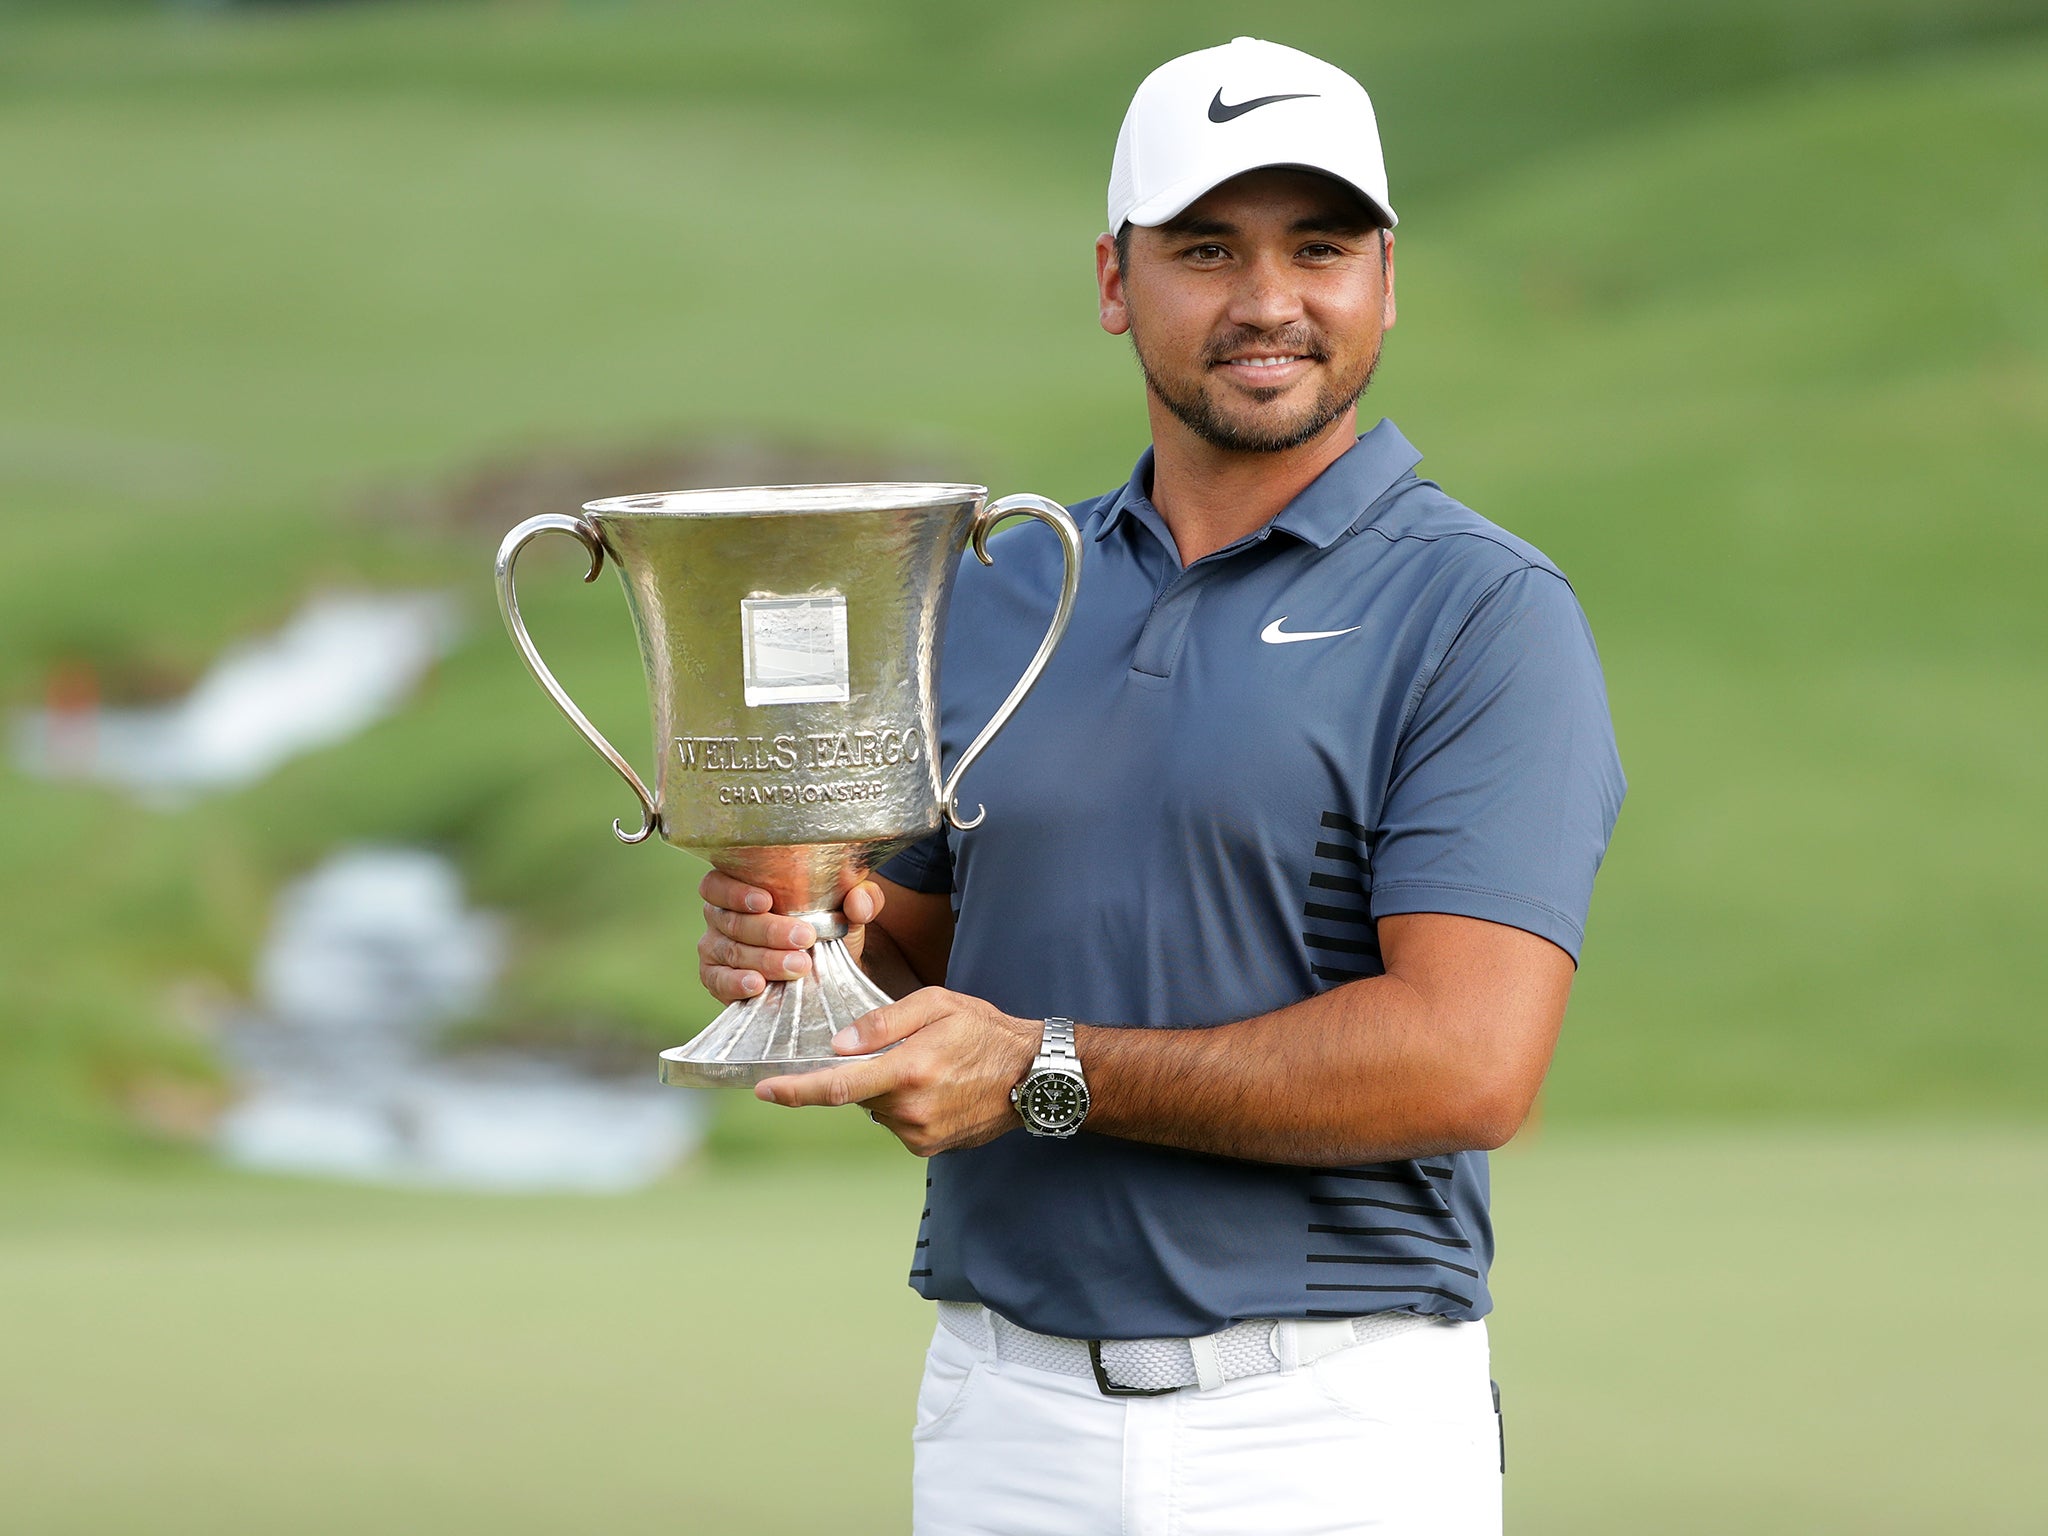 Jason Day clinched his second victory of the year at Quail Hollow